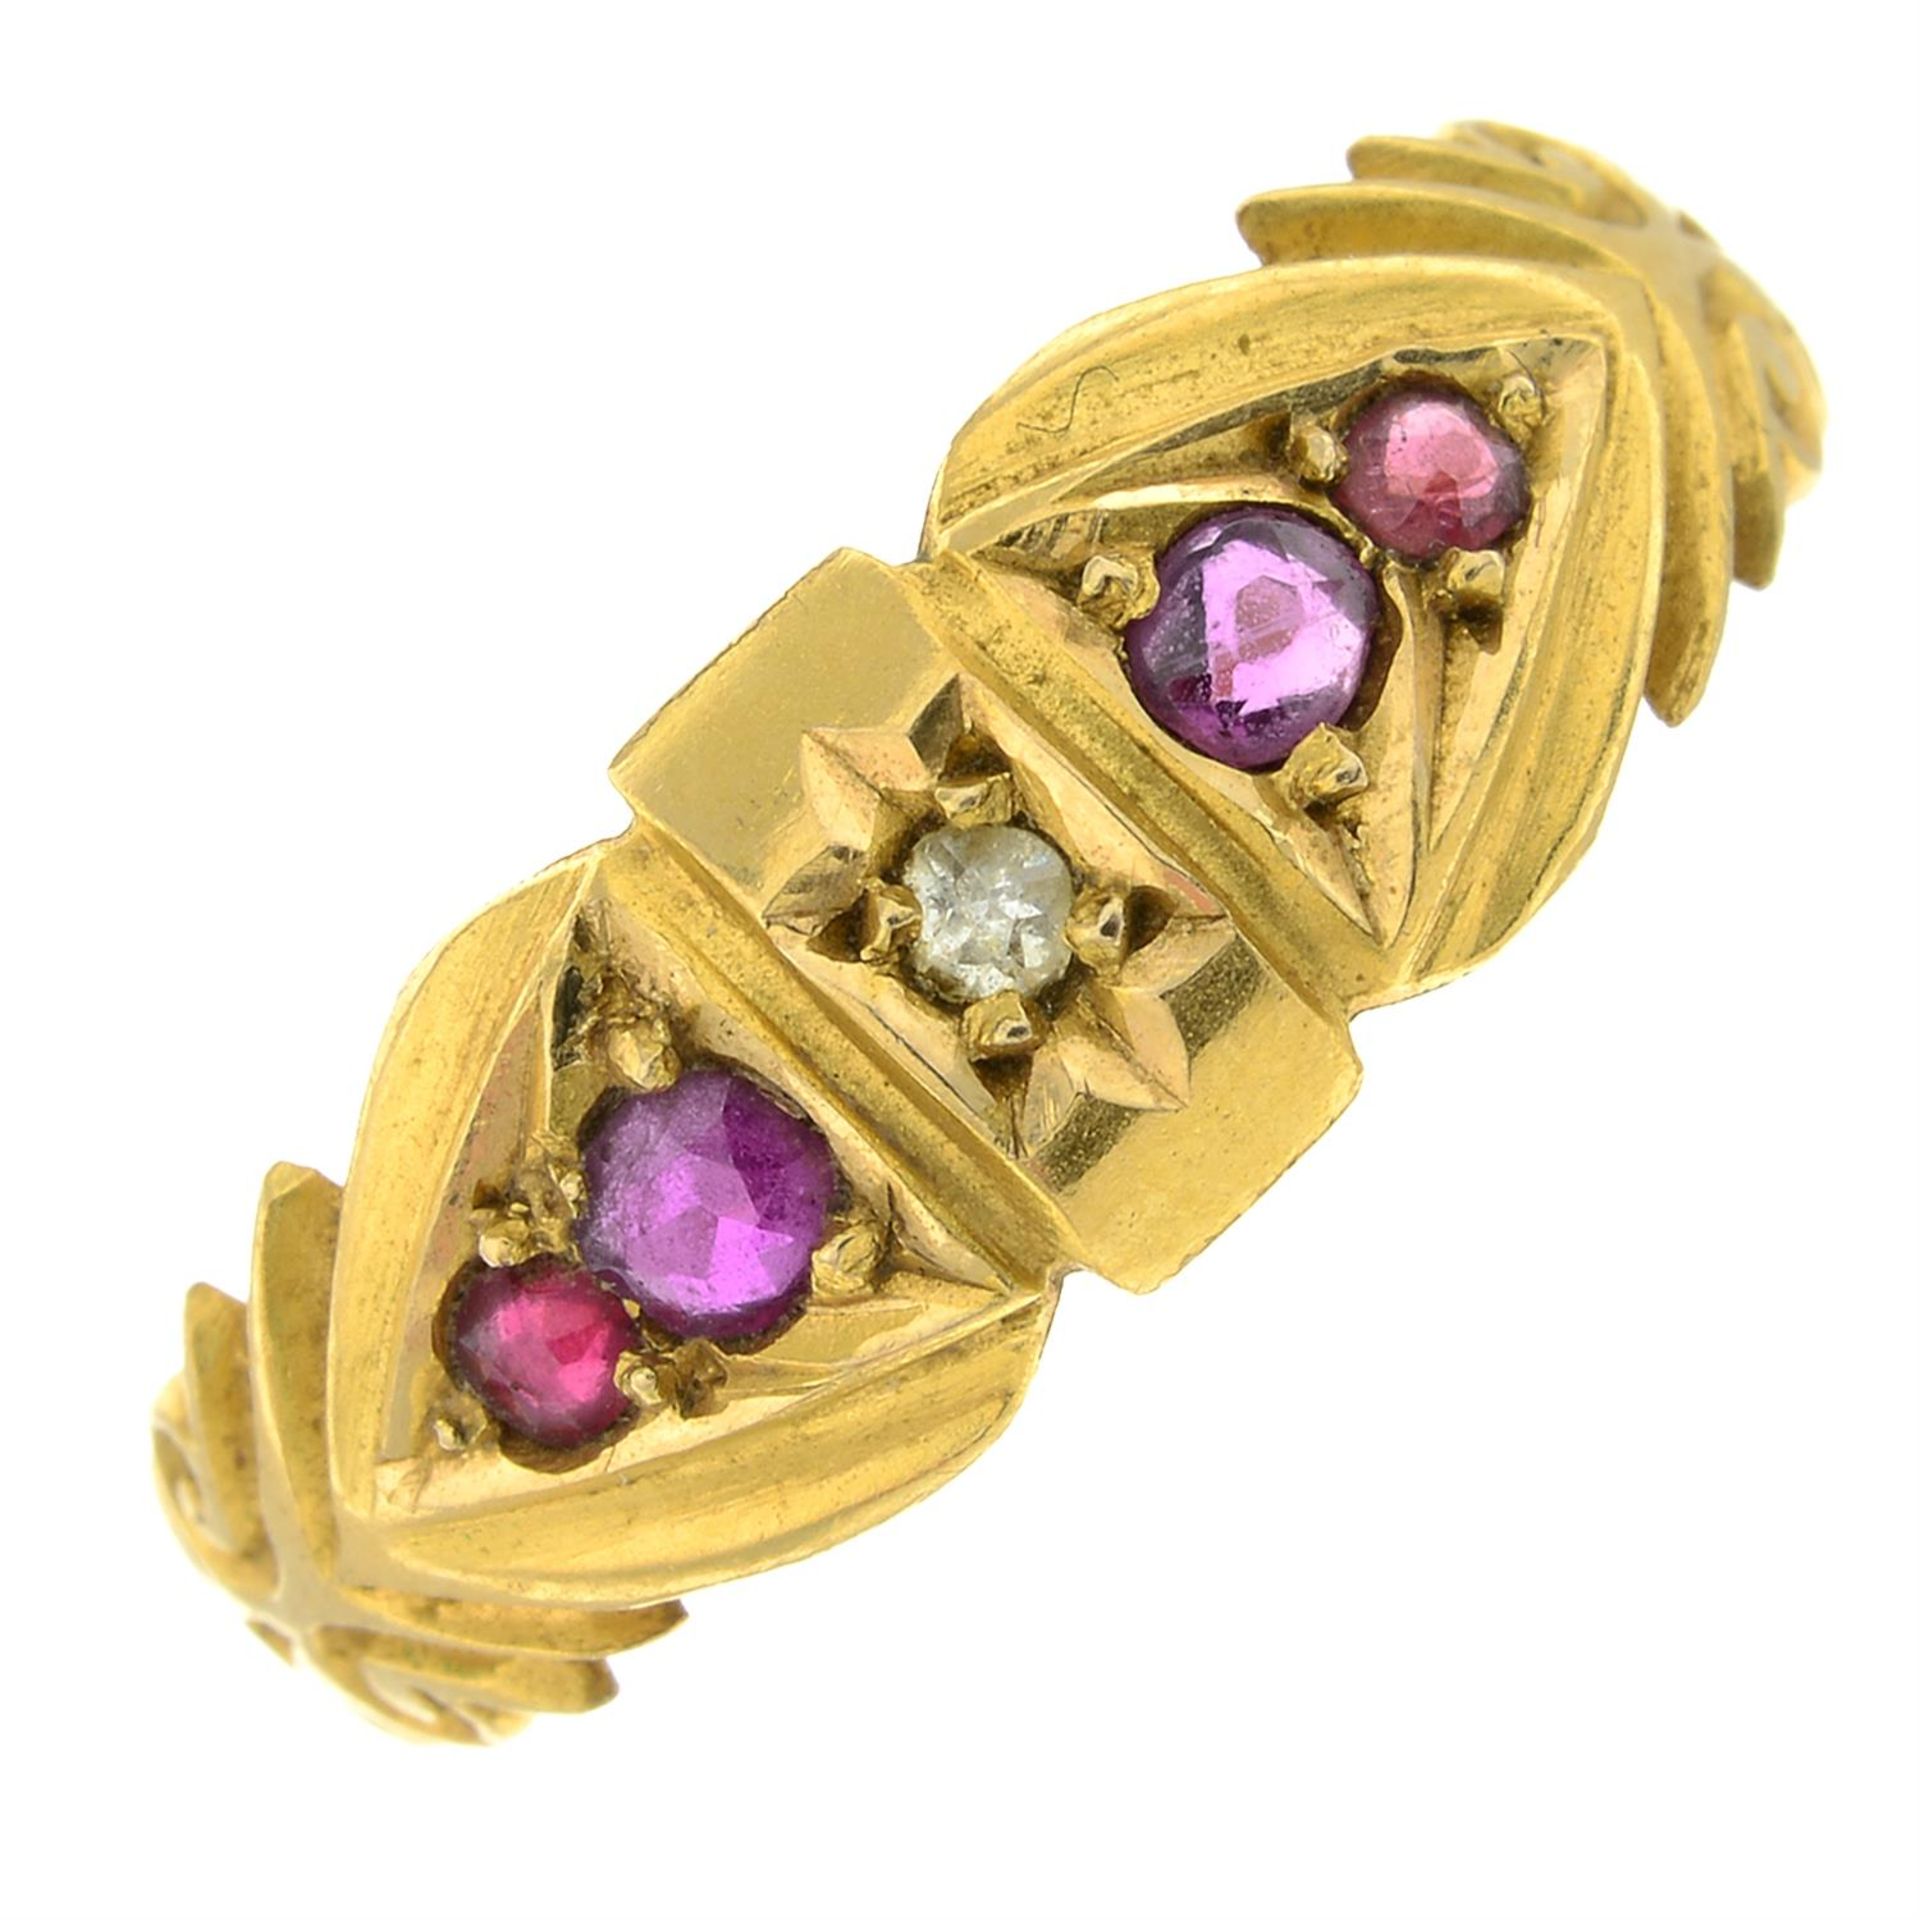 An Edwardian 18ct gold ruby and rose-cut diamond band ring.